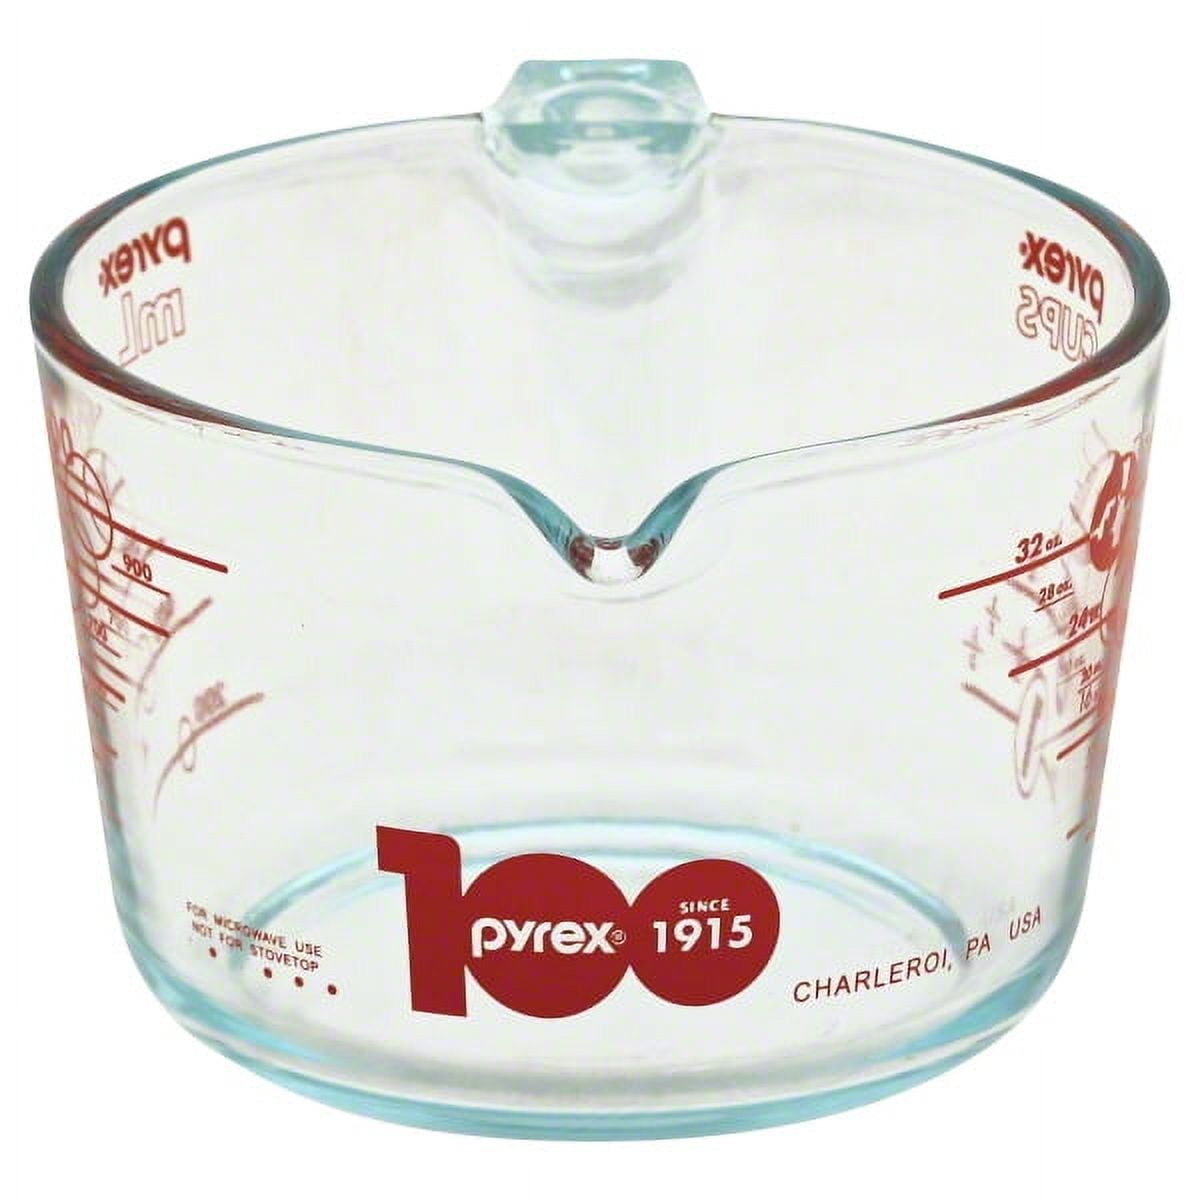 Vintage Pyrex Measuring Cup, 4 Cup/ 32 Ounce Capacity, Bright Red Numbers,  Made in the USA 